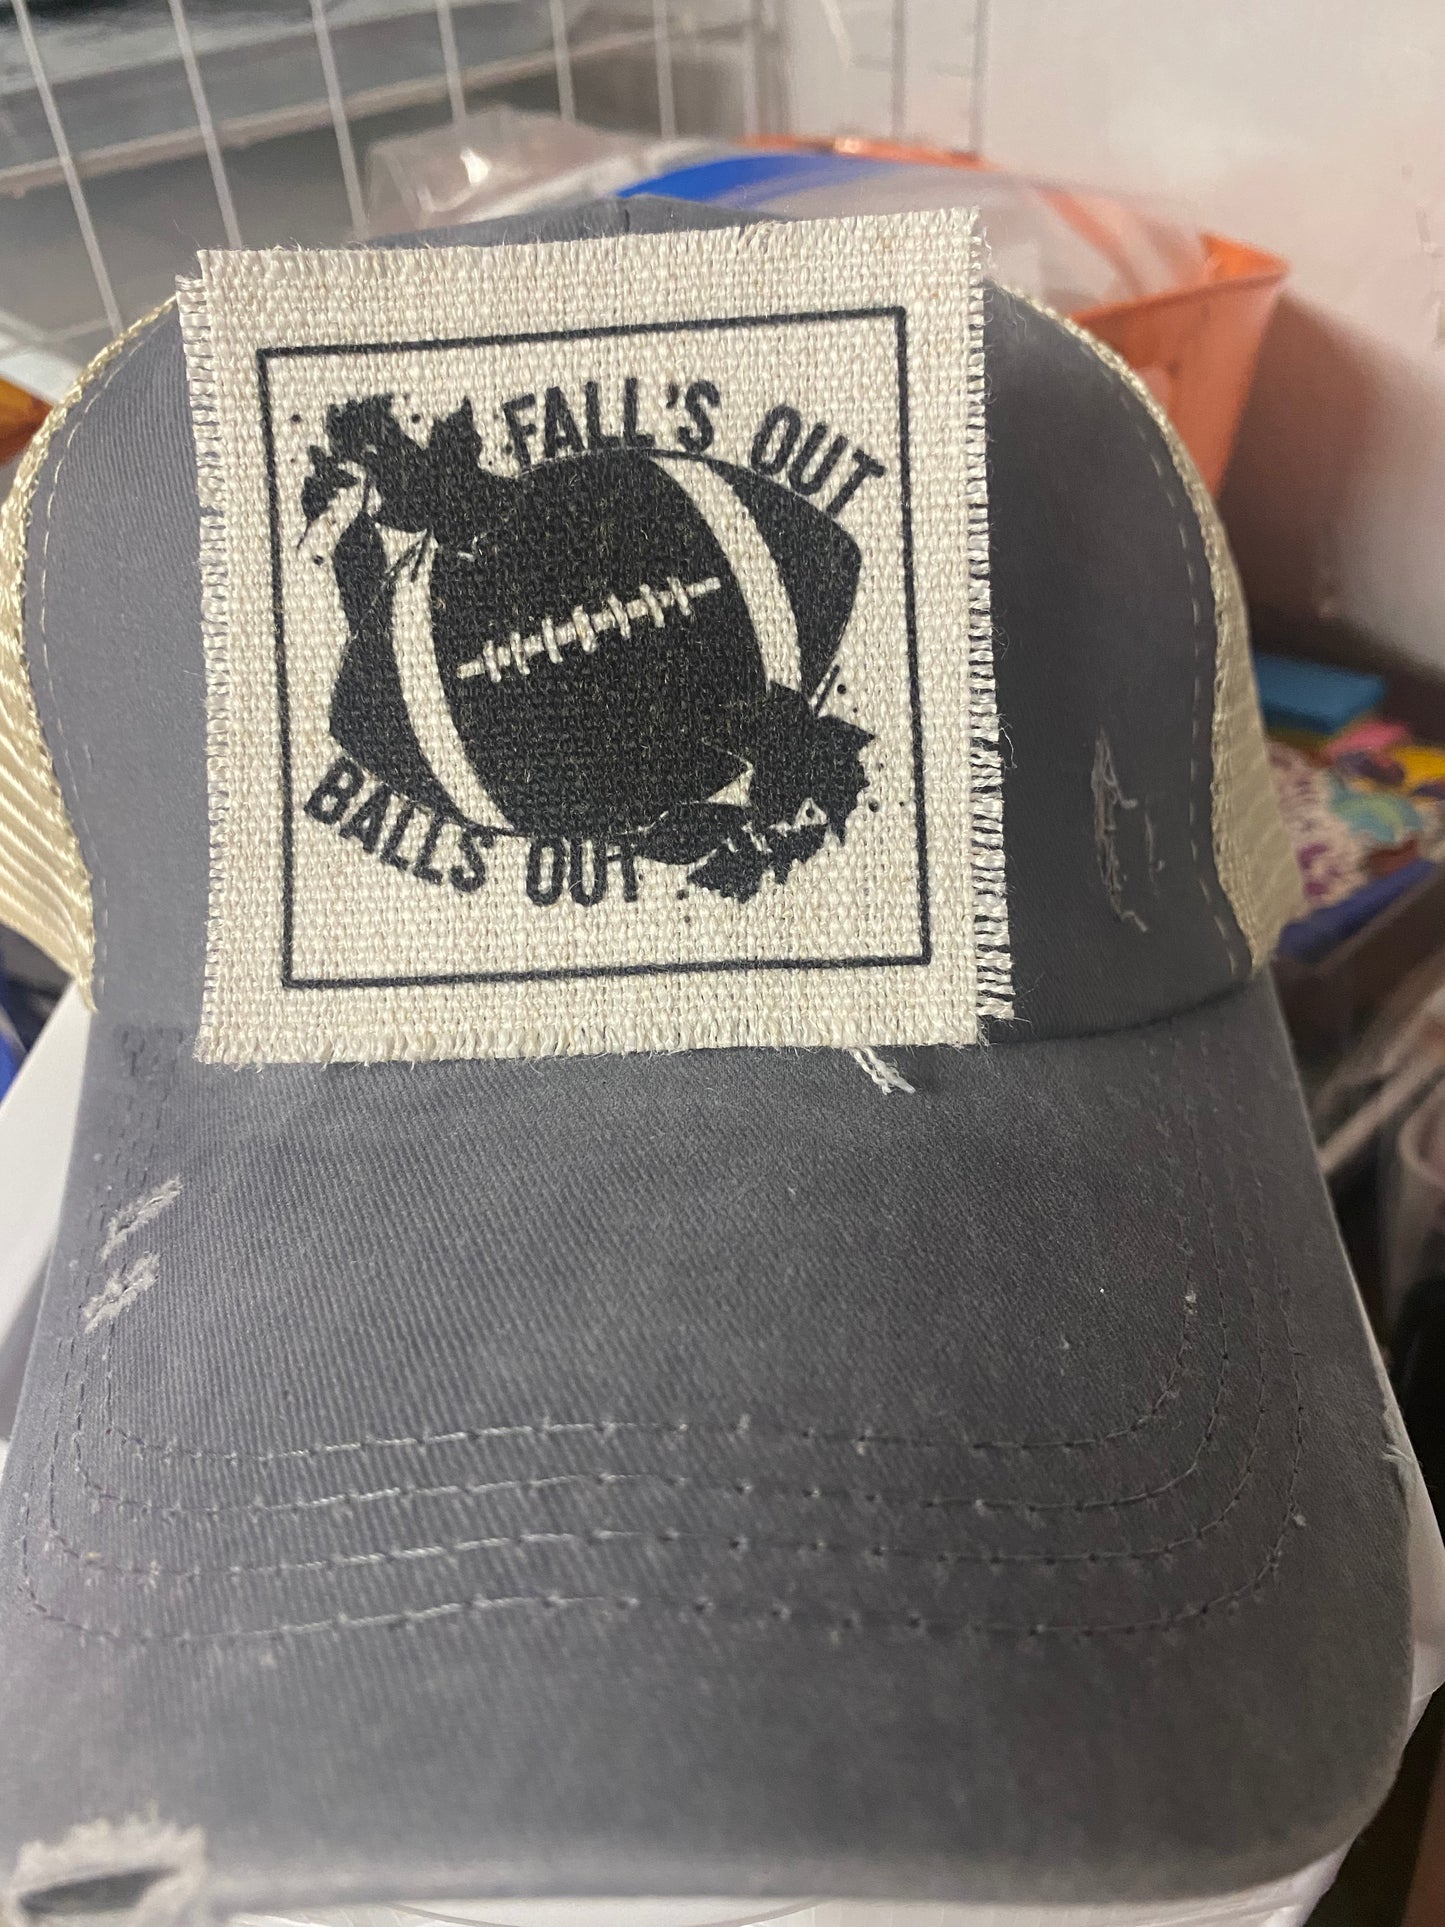 Fall's Out Balls Out Hat Patch